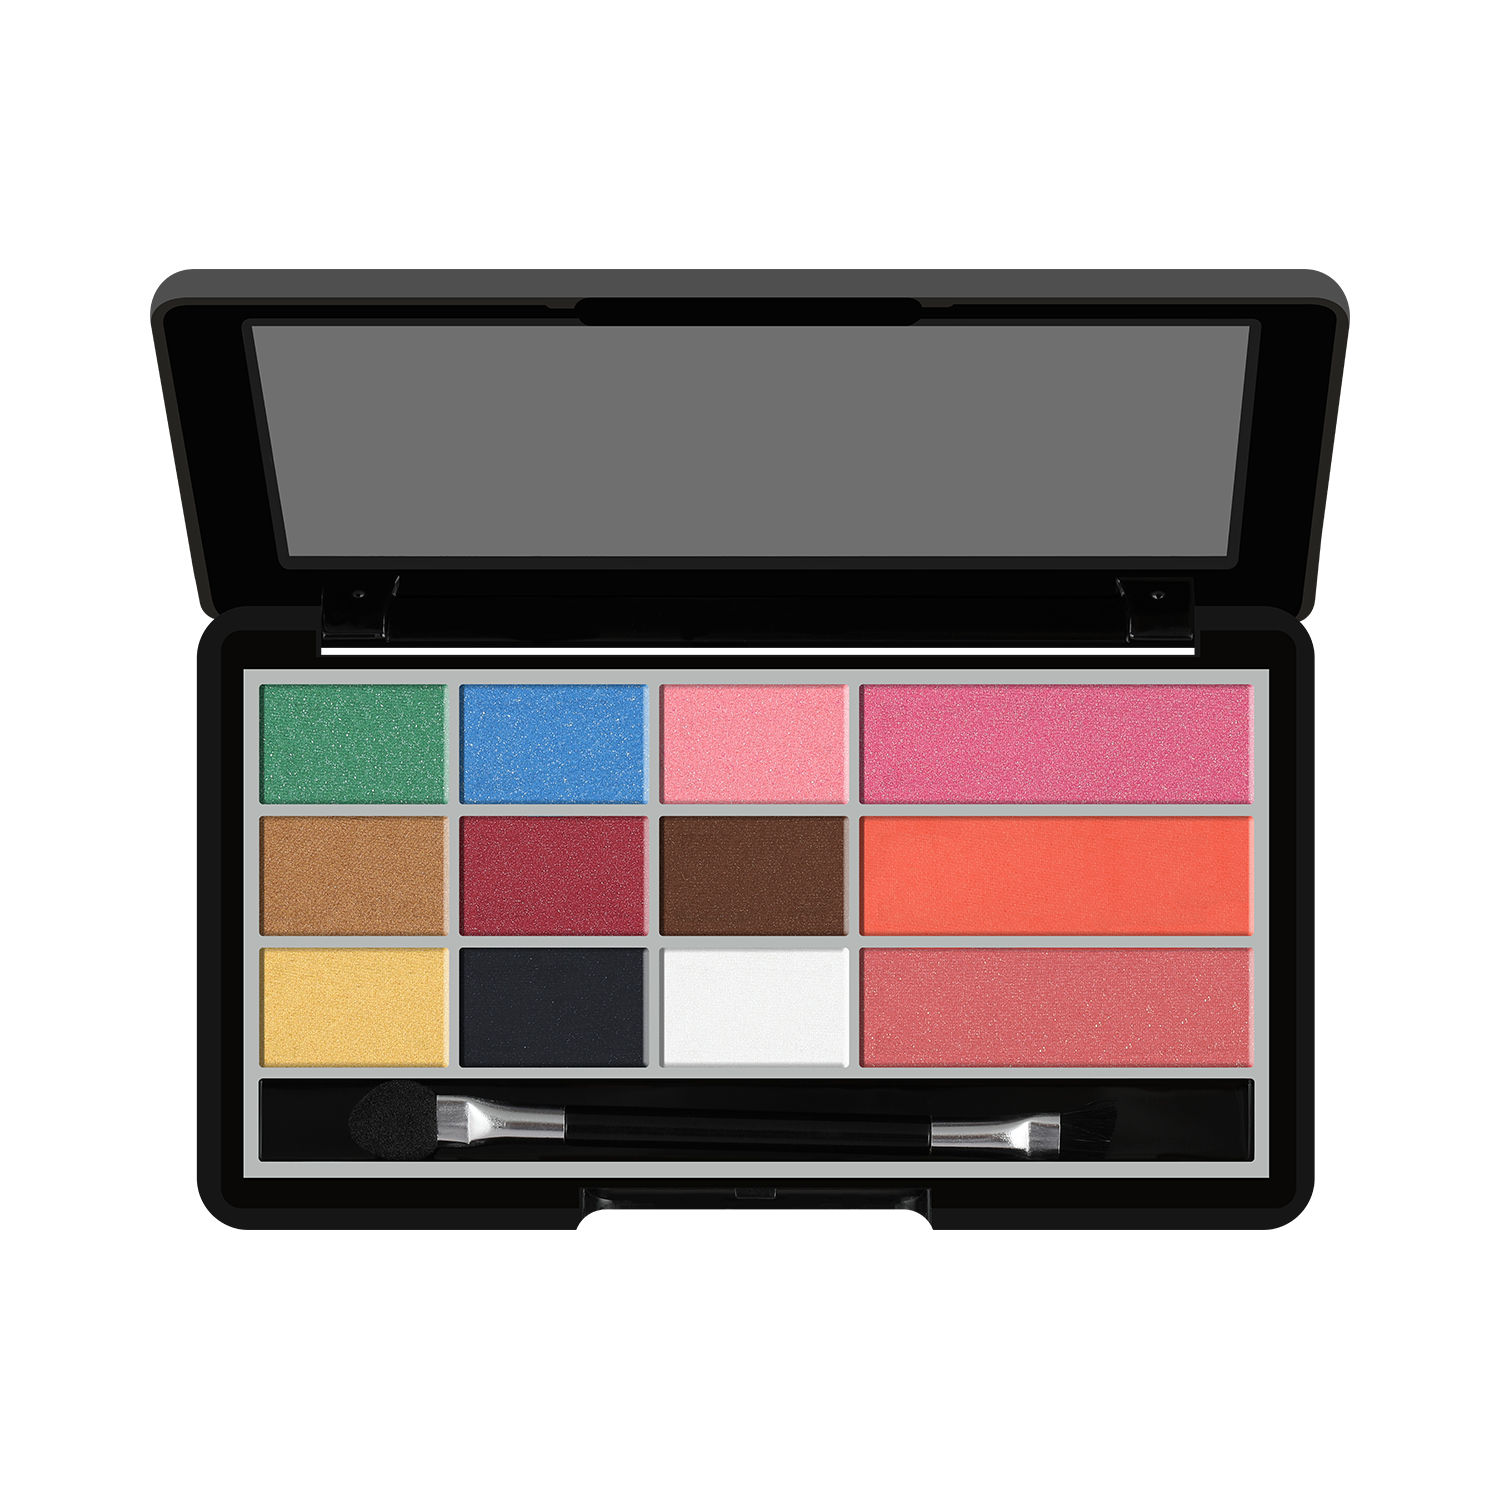 Miss Claire Make Up Palette - 9915 B-4